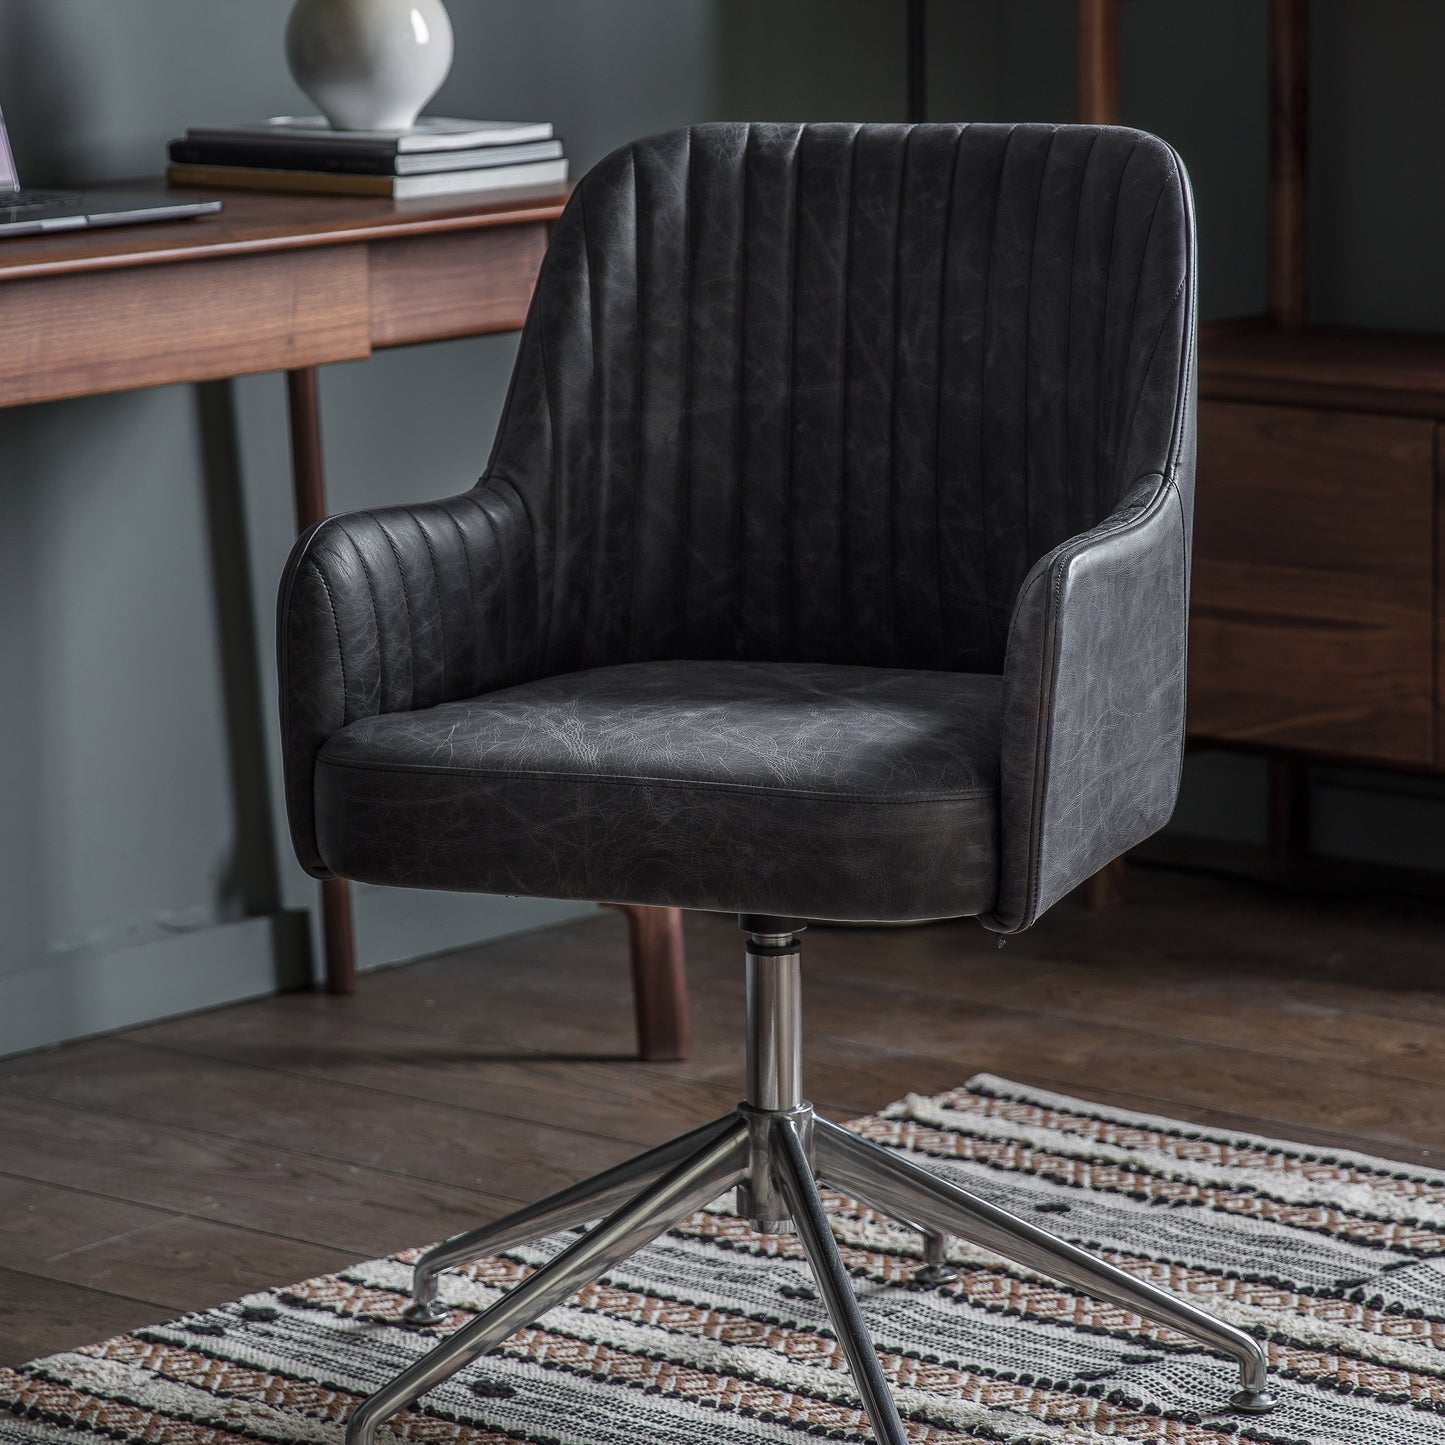 A Curie Swivel Chair in Antique Ebony, a stylish addition to any home interior decor.